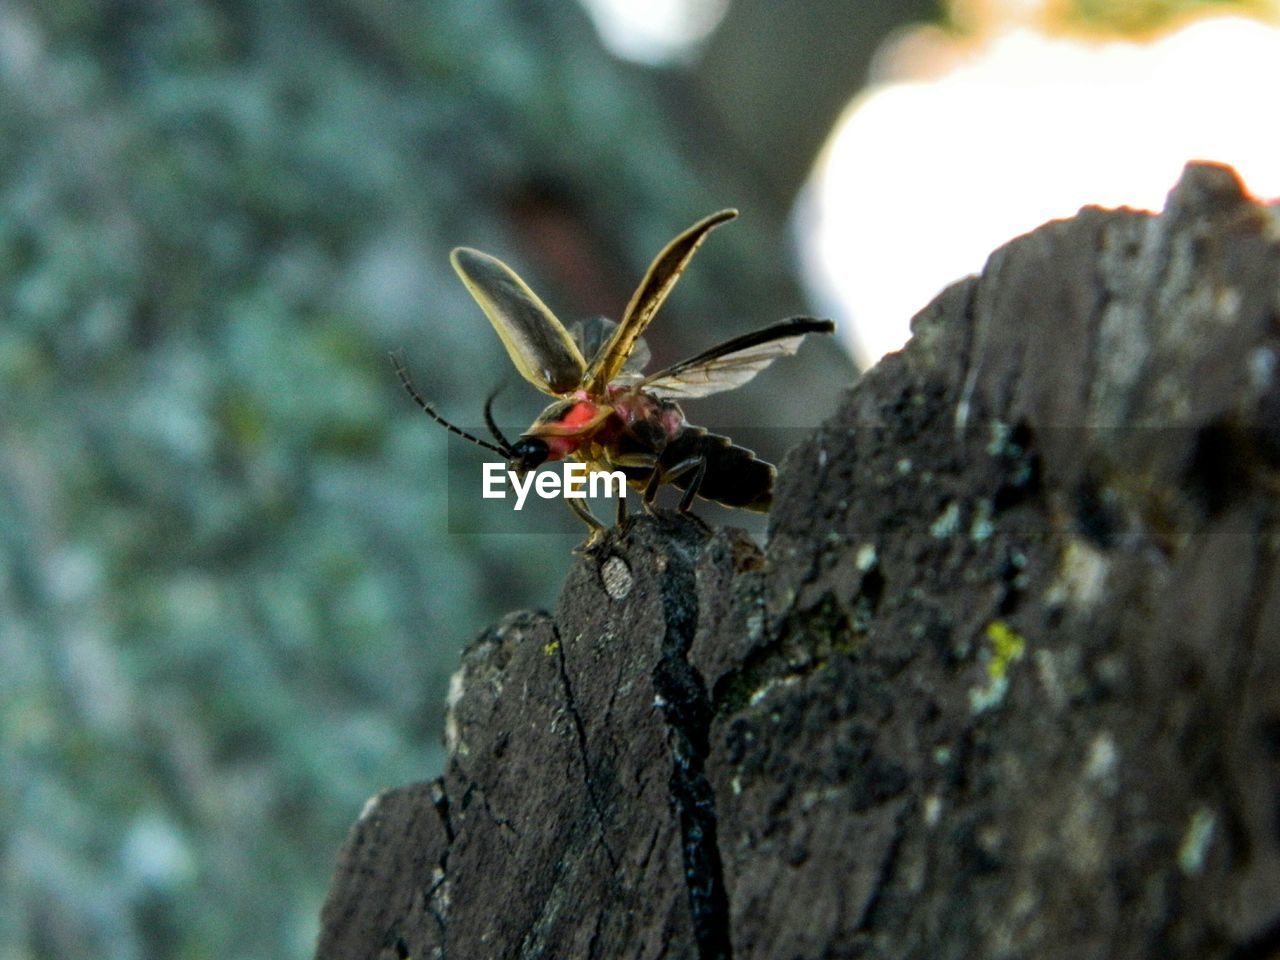 Close-up of an insect on rock against blurred background